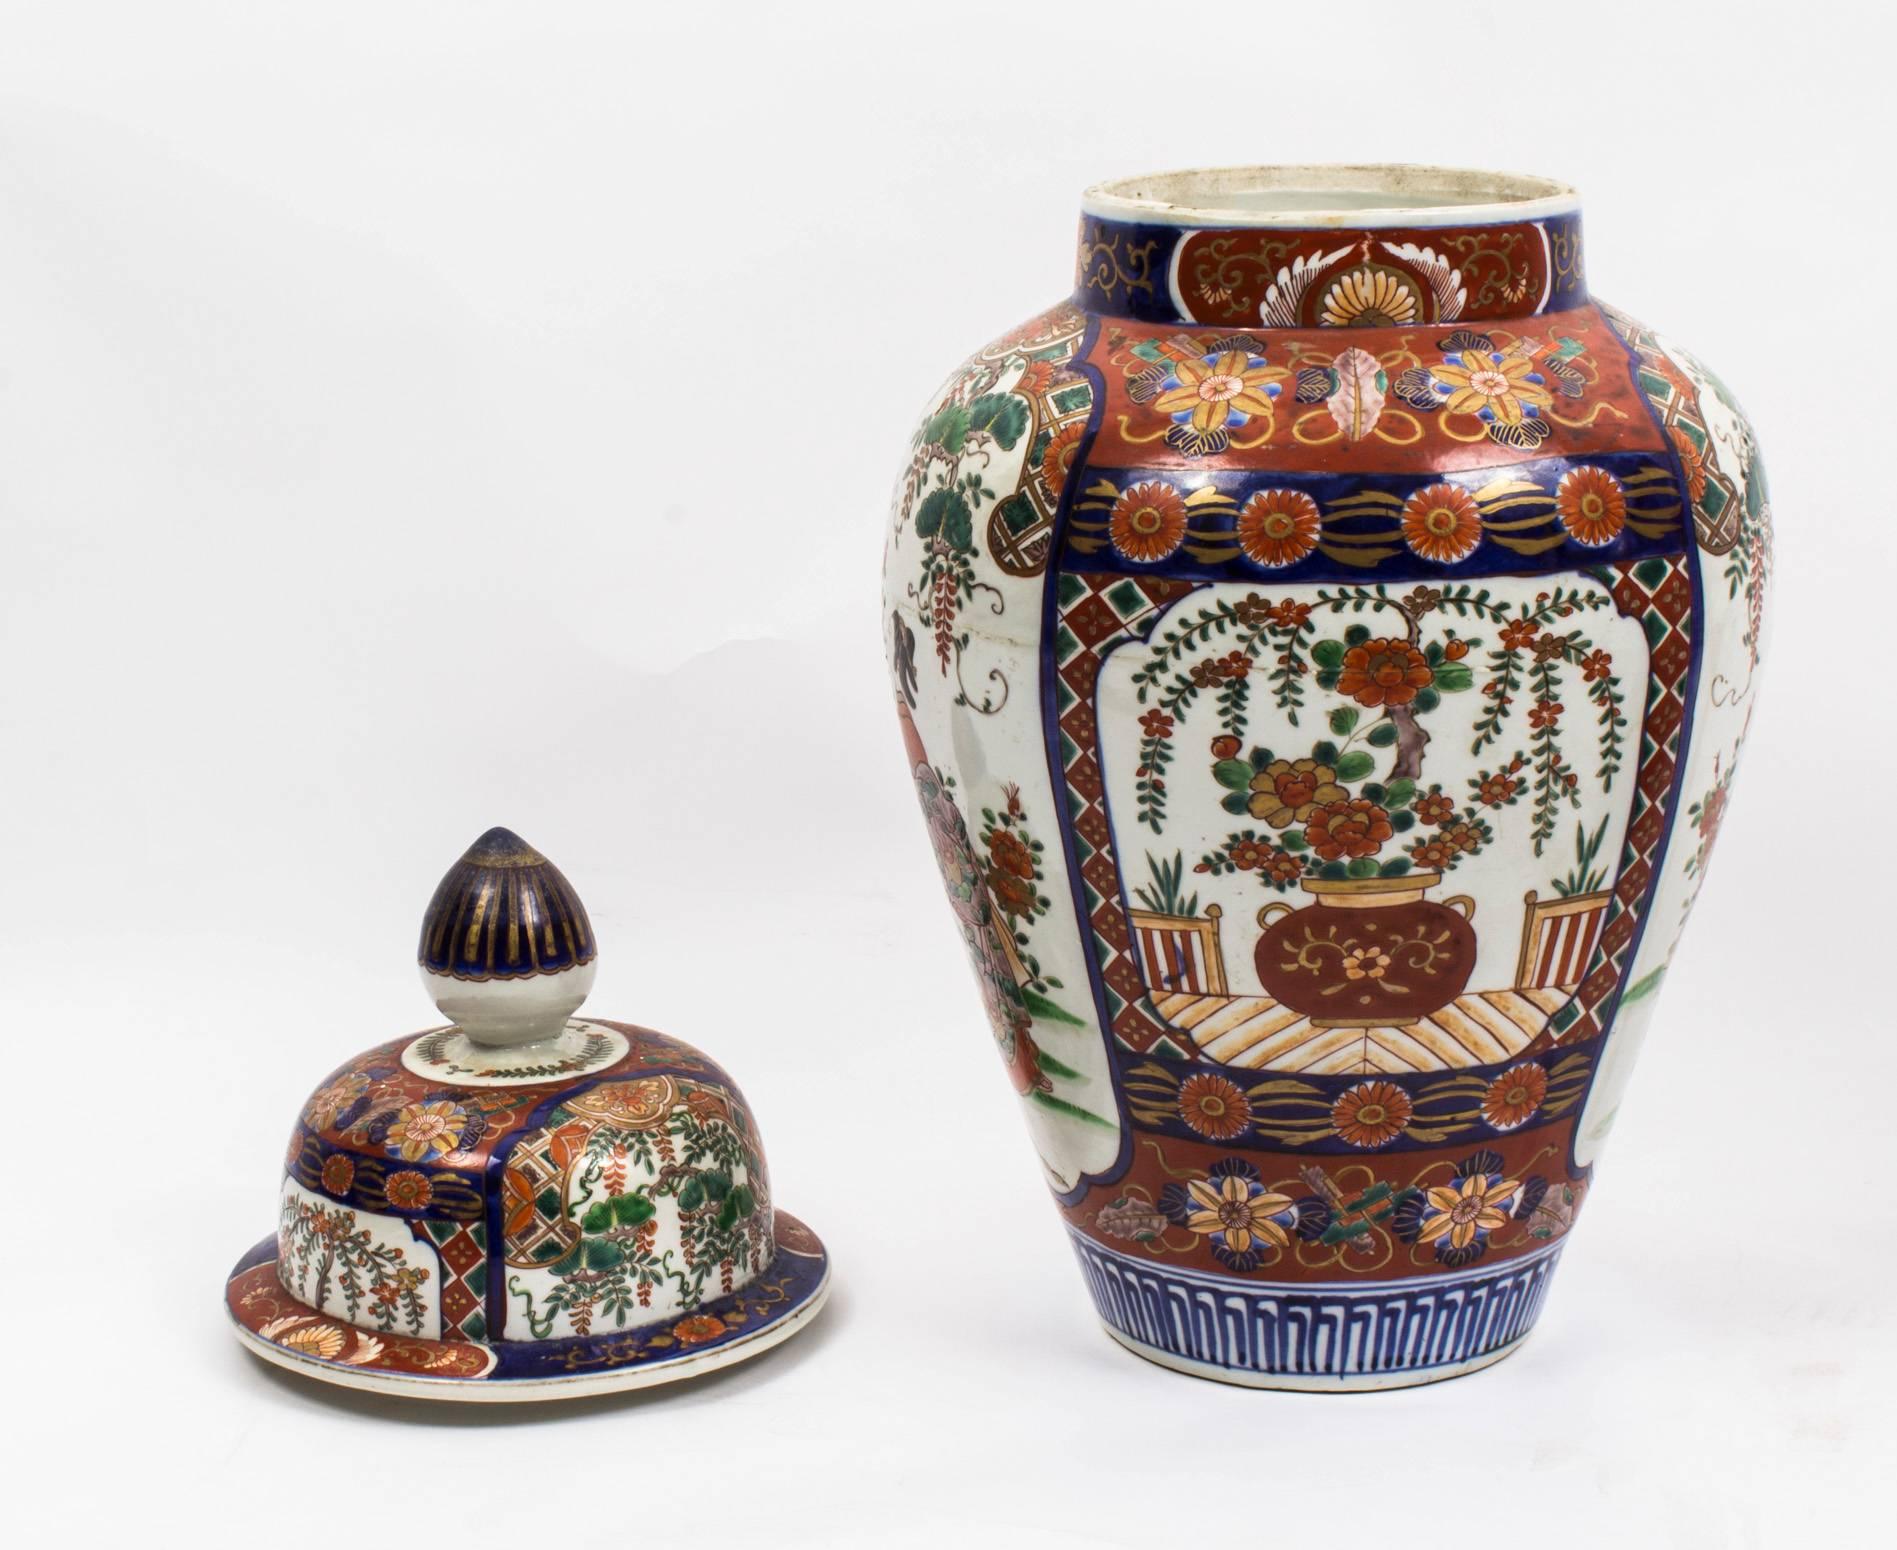 This is a lovely pair of Japanese Imari temple jars with lids, circa 1870 in date.

They feature a dense chrysanthemum floral based design with panels of geisha girls and attendants. The ground with flower heads and leaves, in the traditional